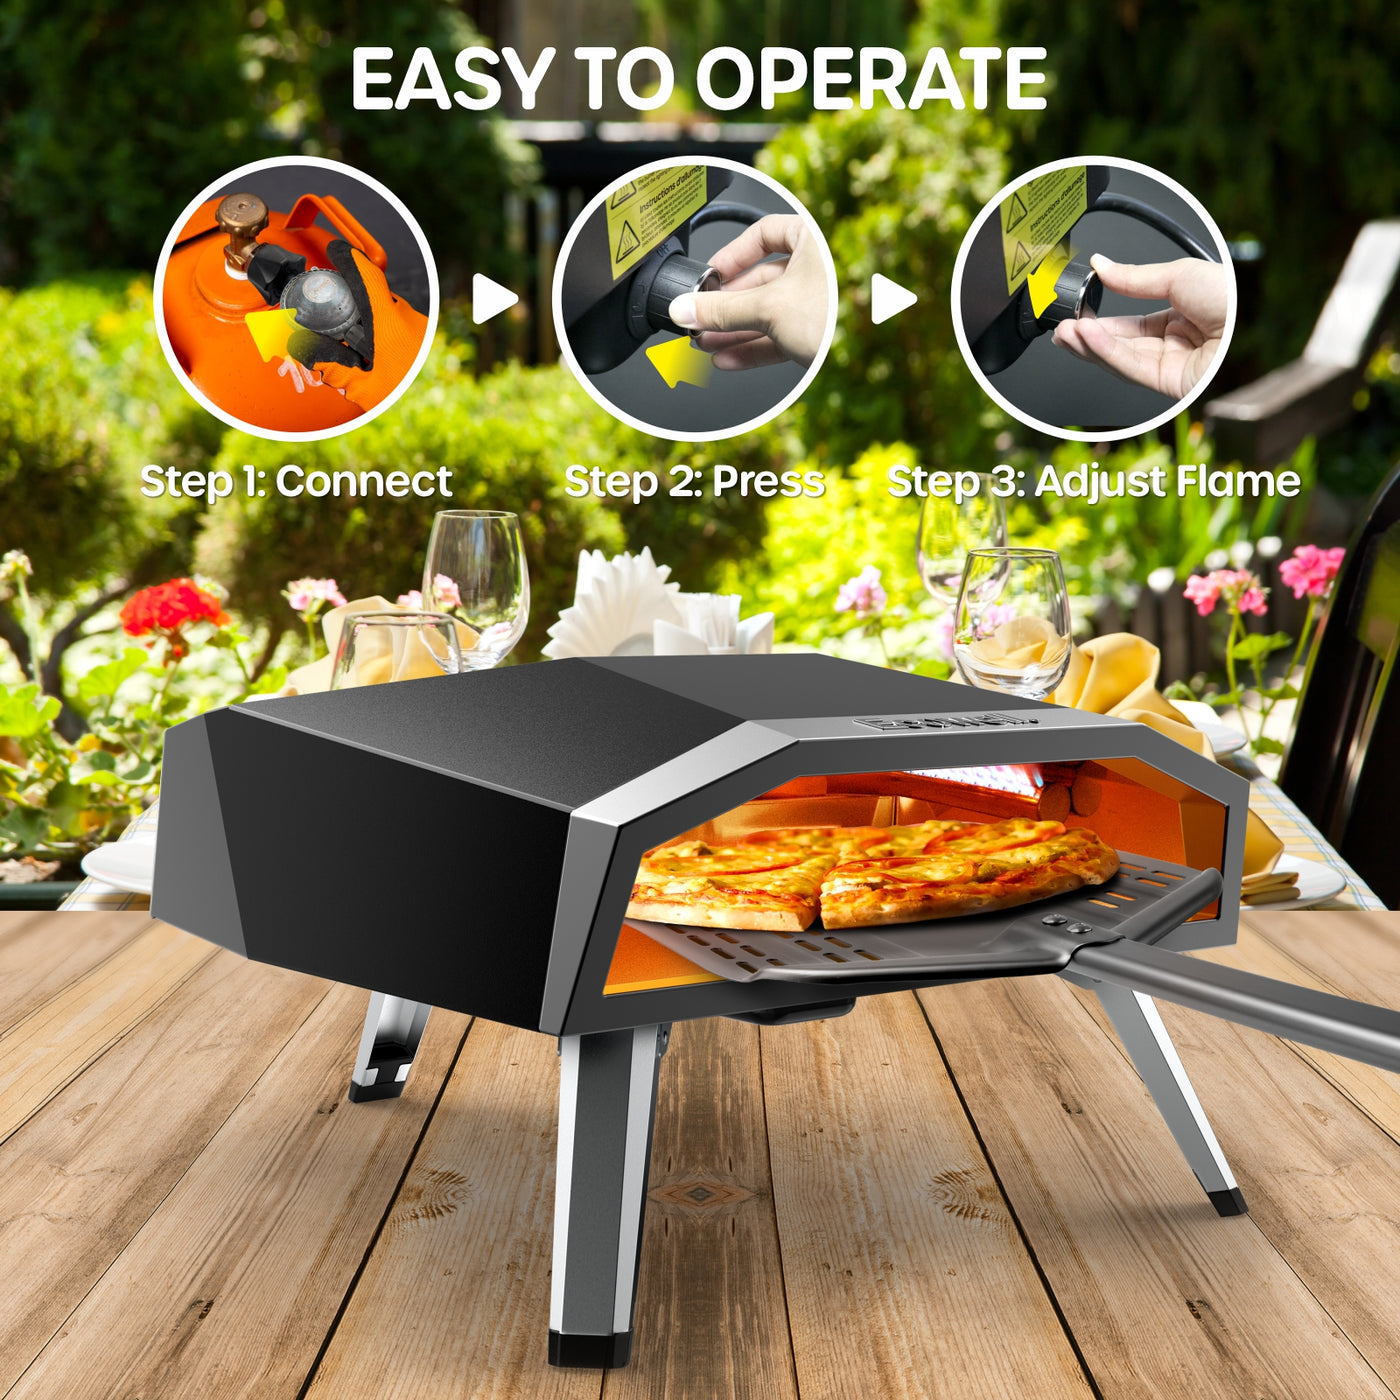 ECOWELL - 16" Gas Buitenshuis Pizza Oven